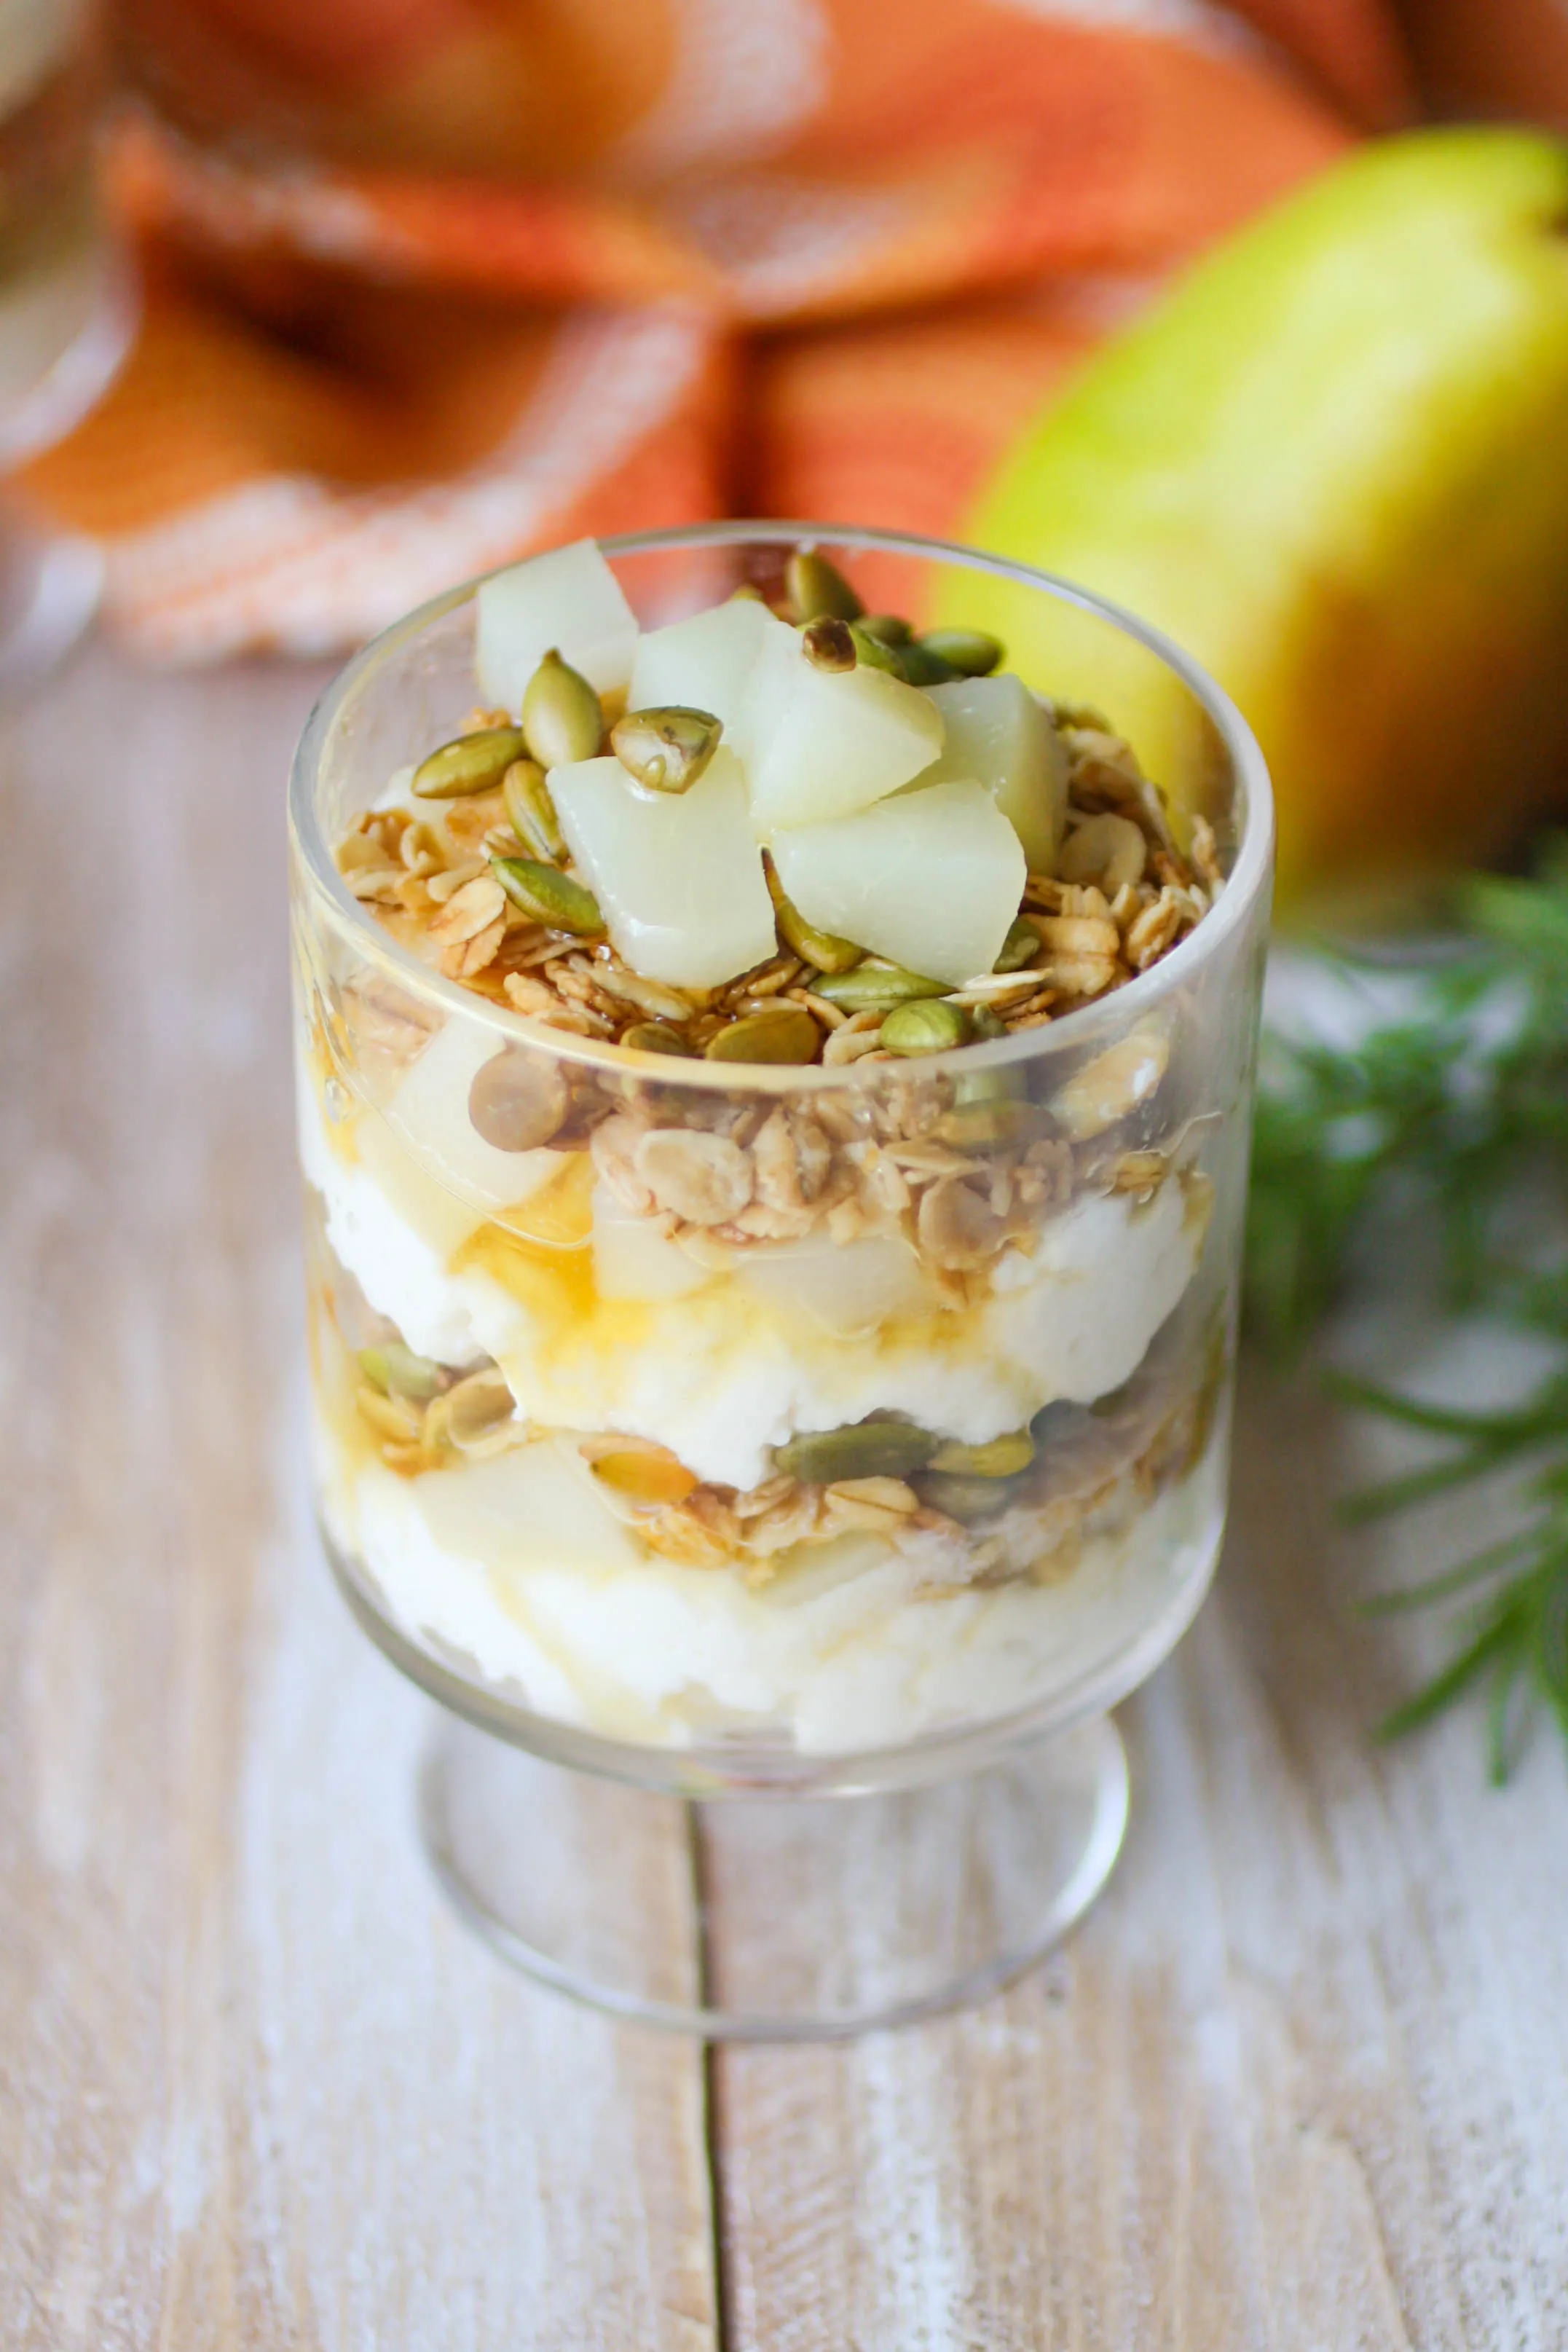 Pear and Ricotta Parfaits with Rosemary-Infused Honey are perfect for breakfast, or for a simple dessert. You'll love these pear parfaits and all their goodness!